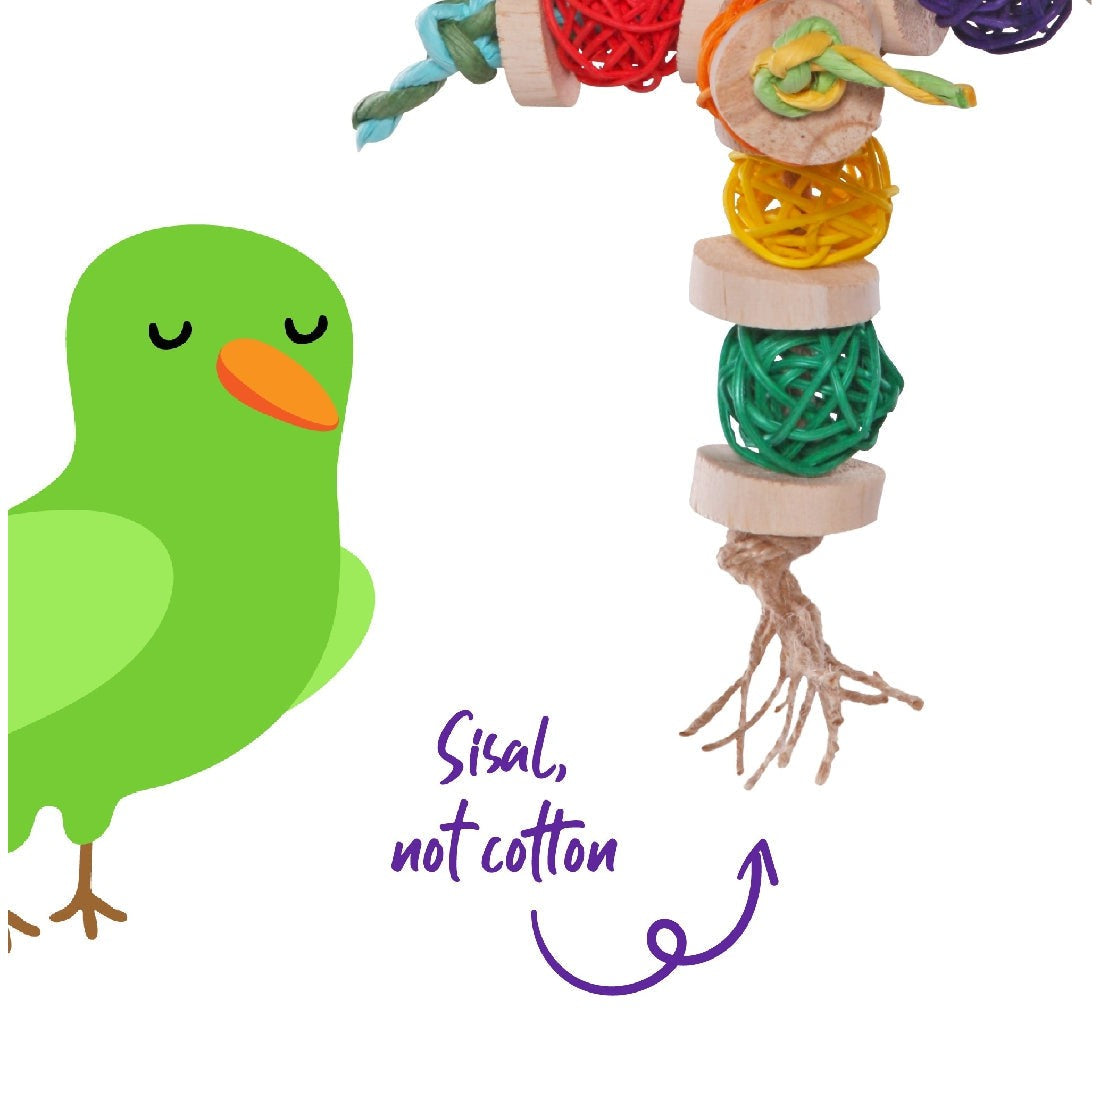 Green bird toy next to colorful hanging sisal rope toy.